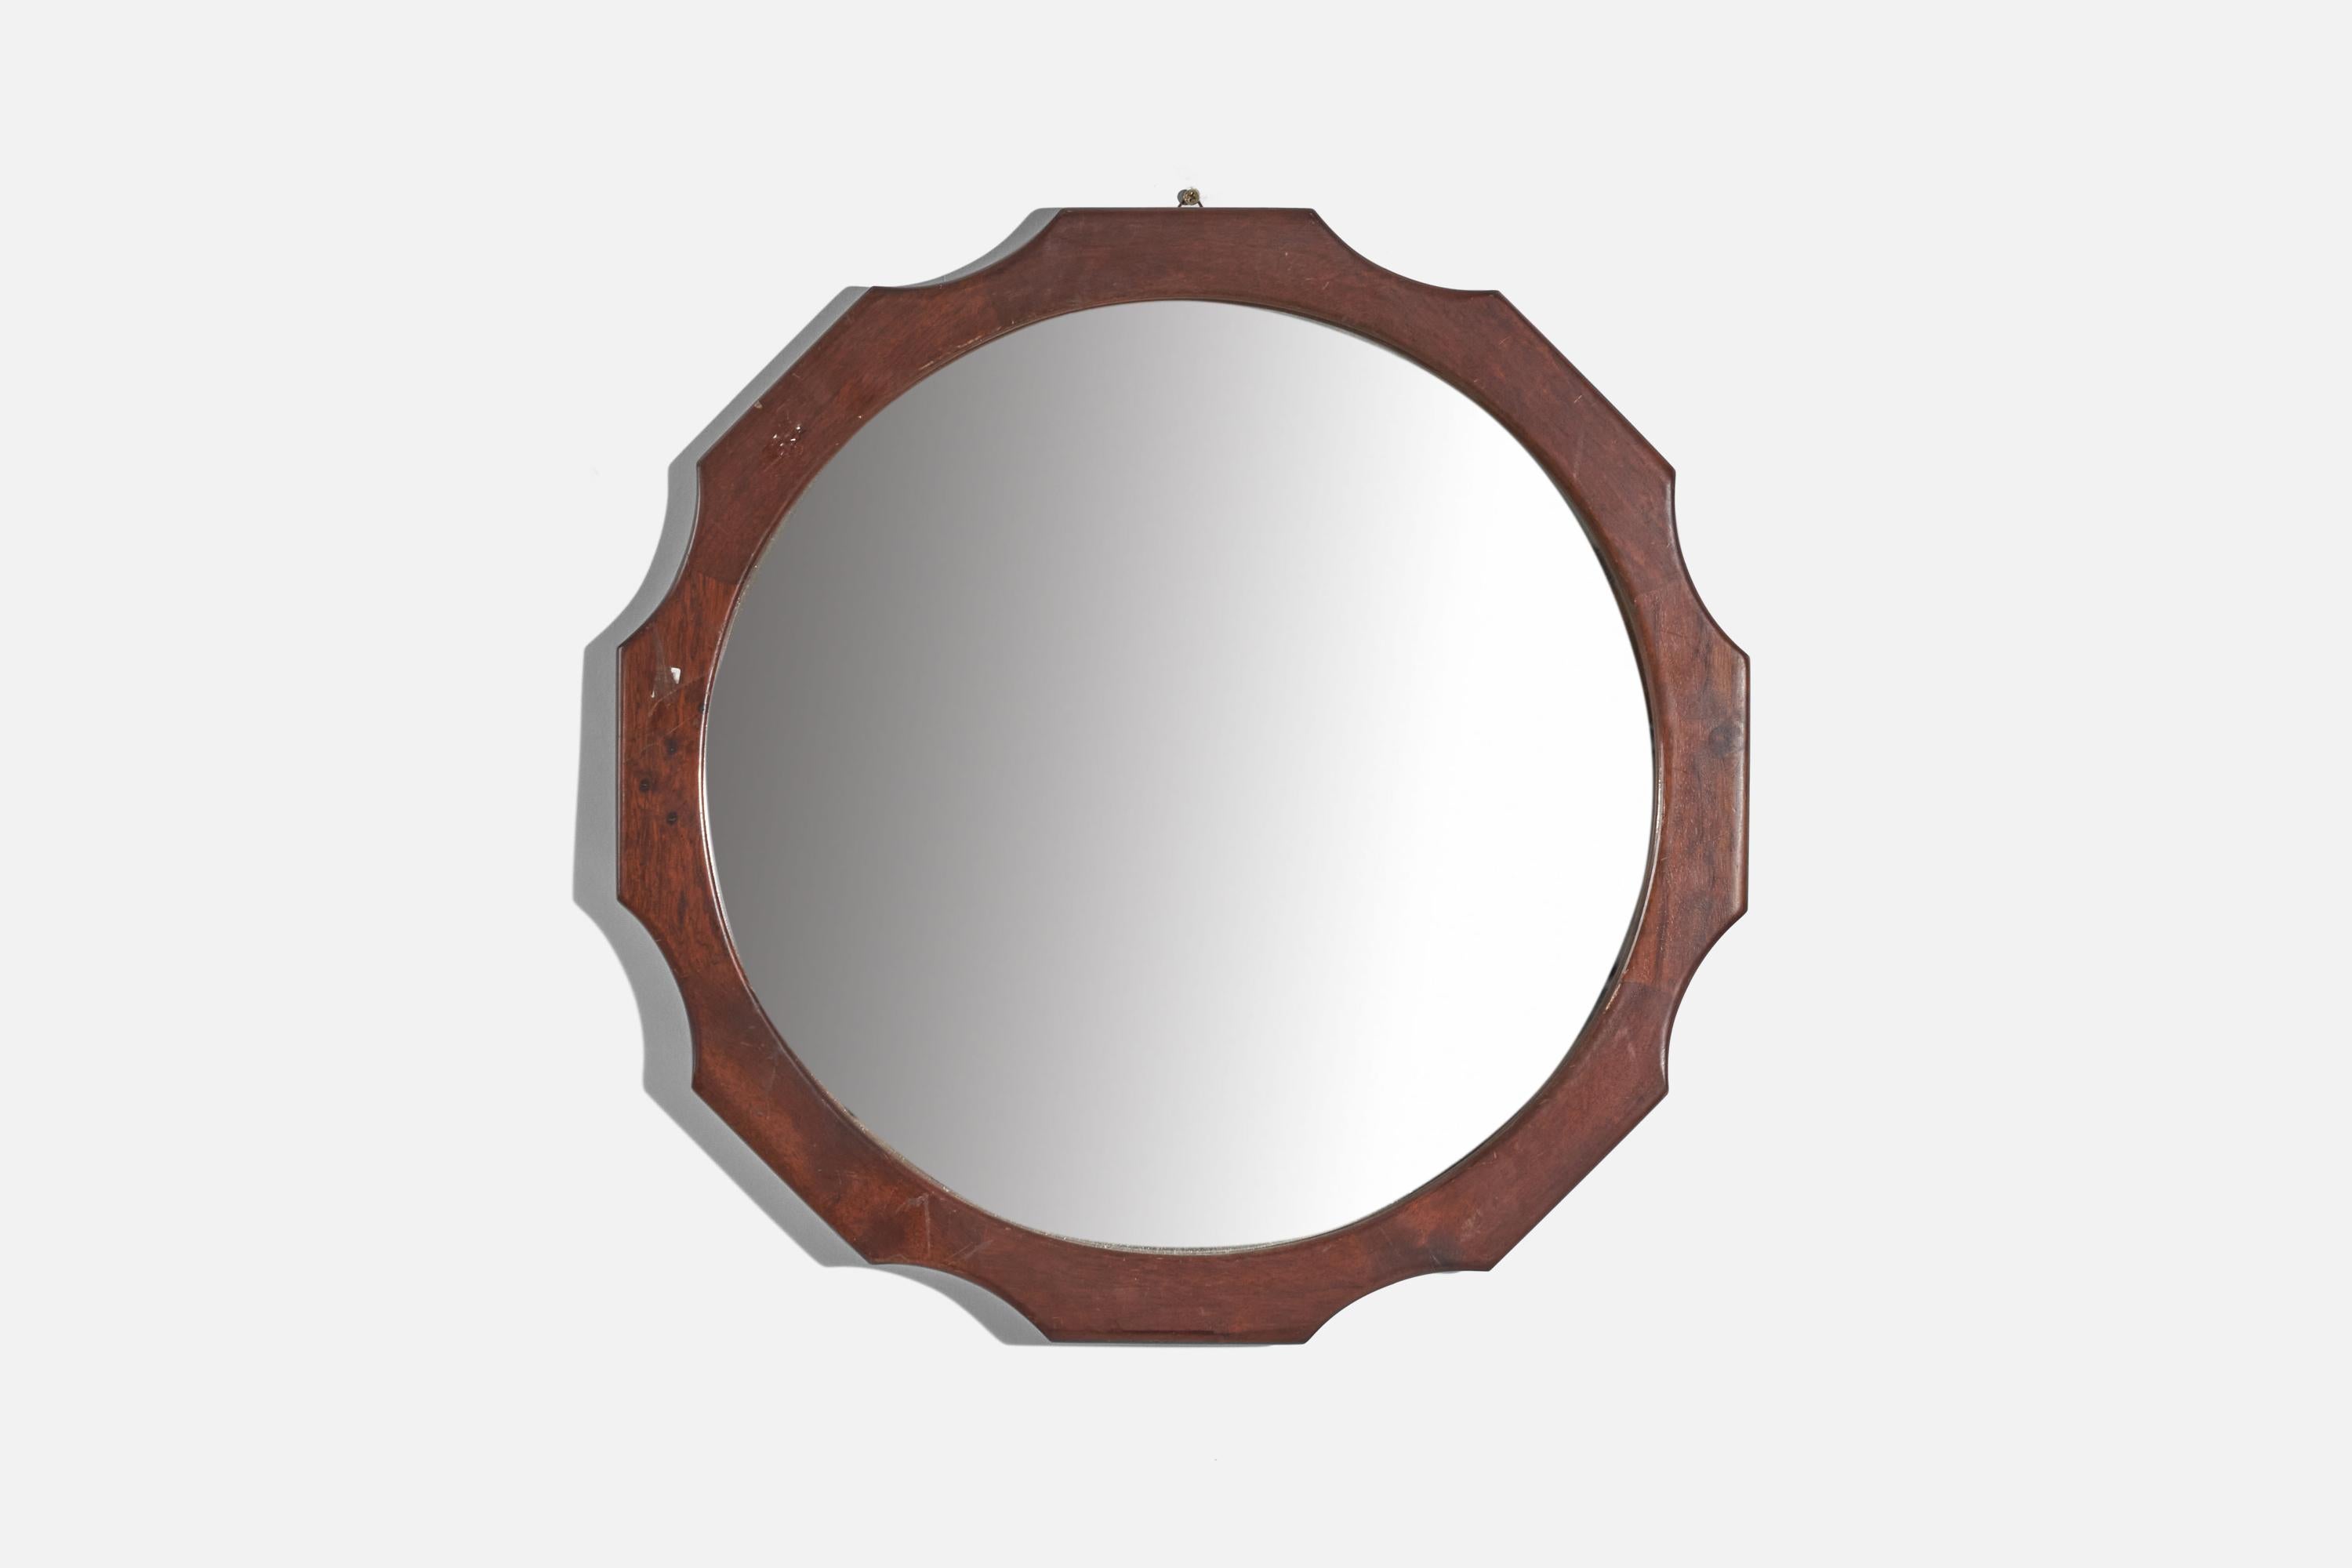 A wooden wall mirror designed and produced in Italy, c. 1950s.
 